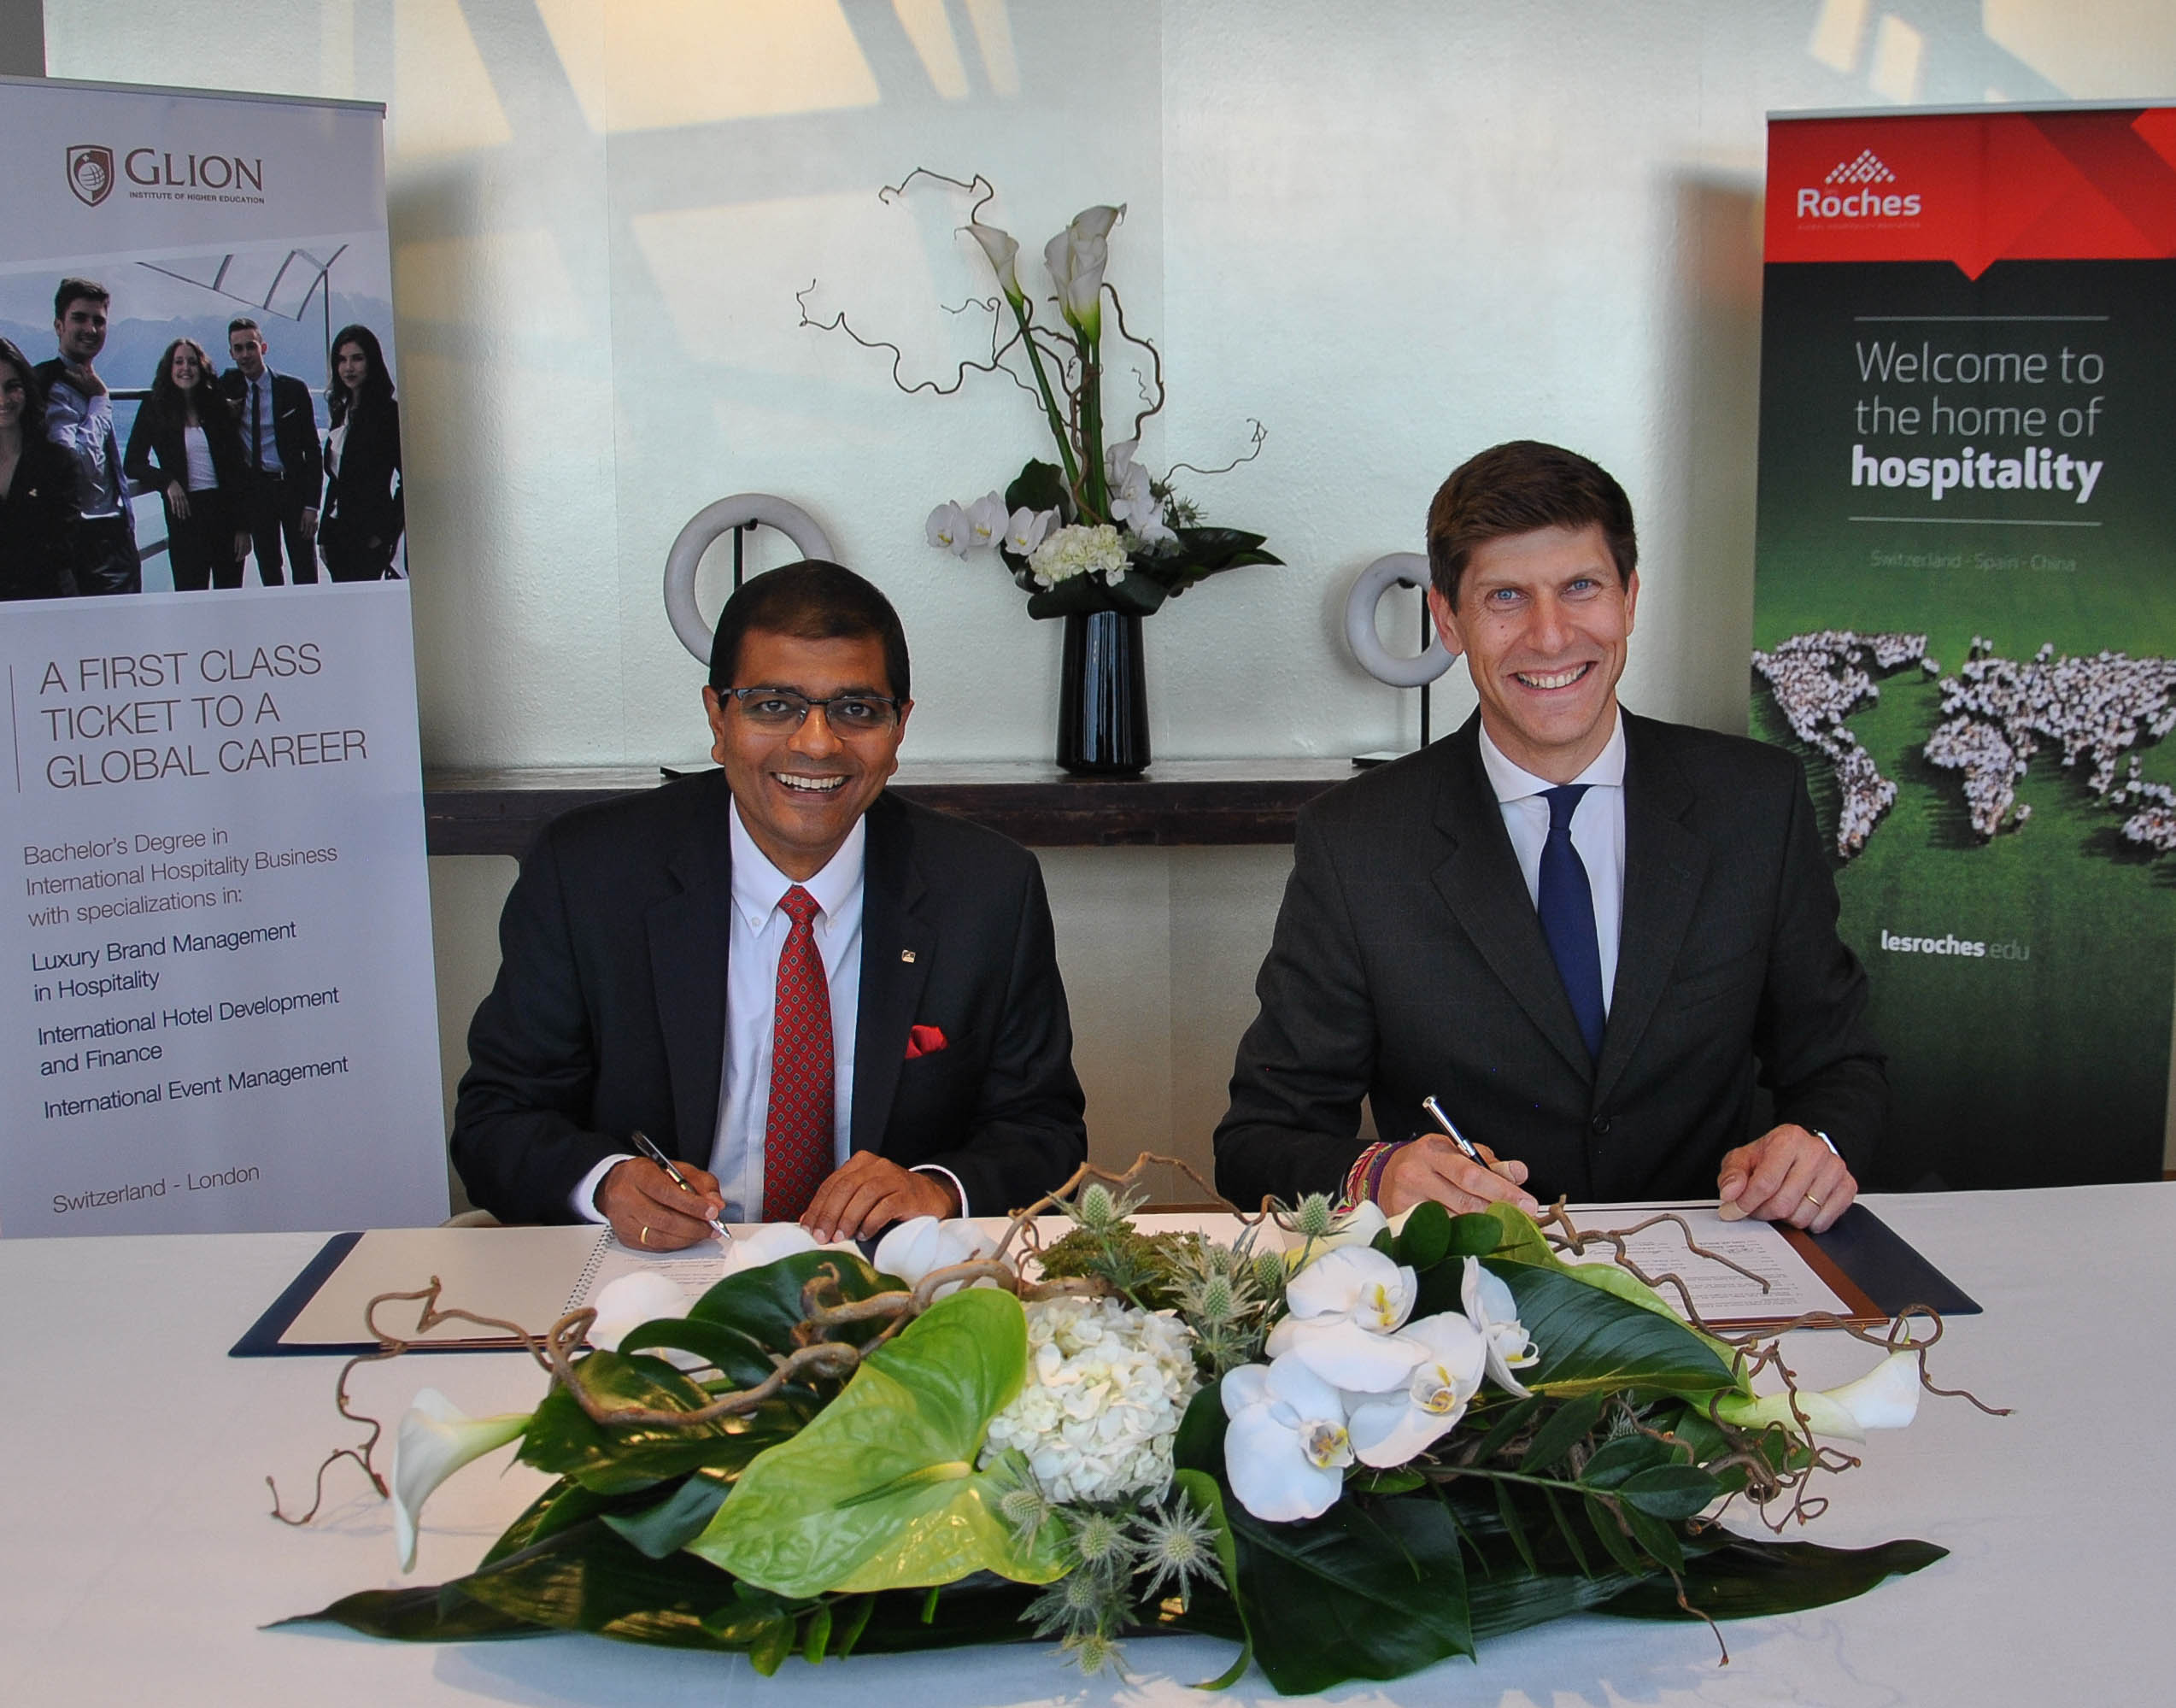 Sommet Education partners with IHG to develop global hospitality talent